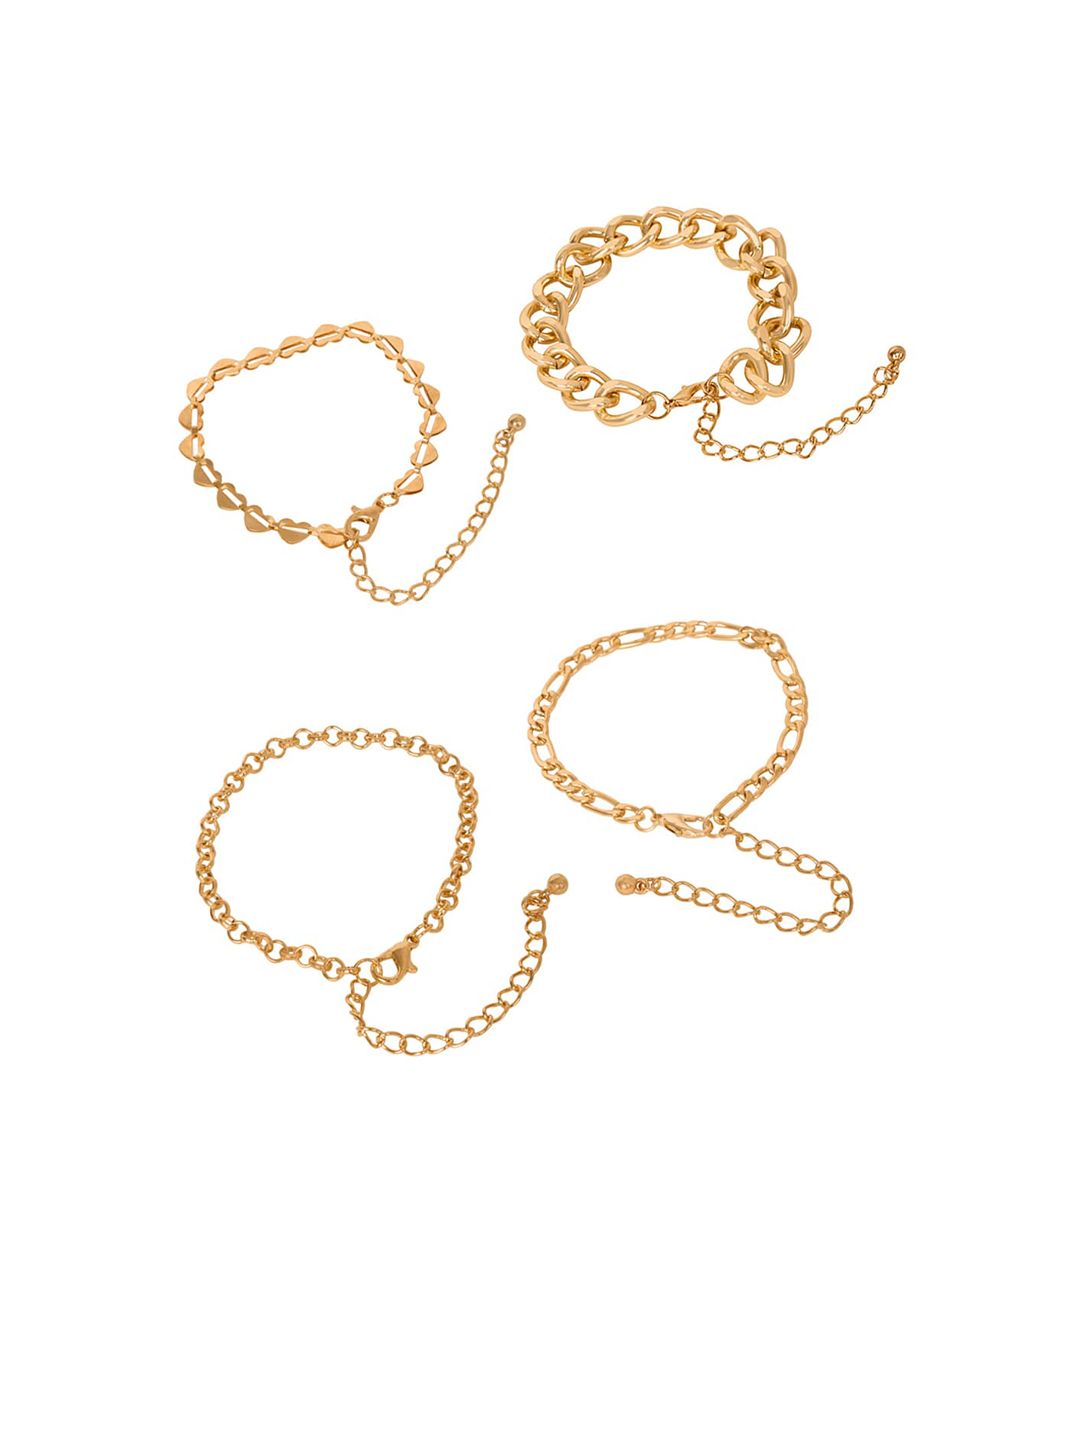 FabAlley Women Set of 4 Gold-Toned Gold-Plated Link Bracelet Price in India